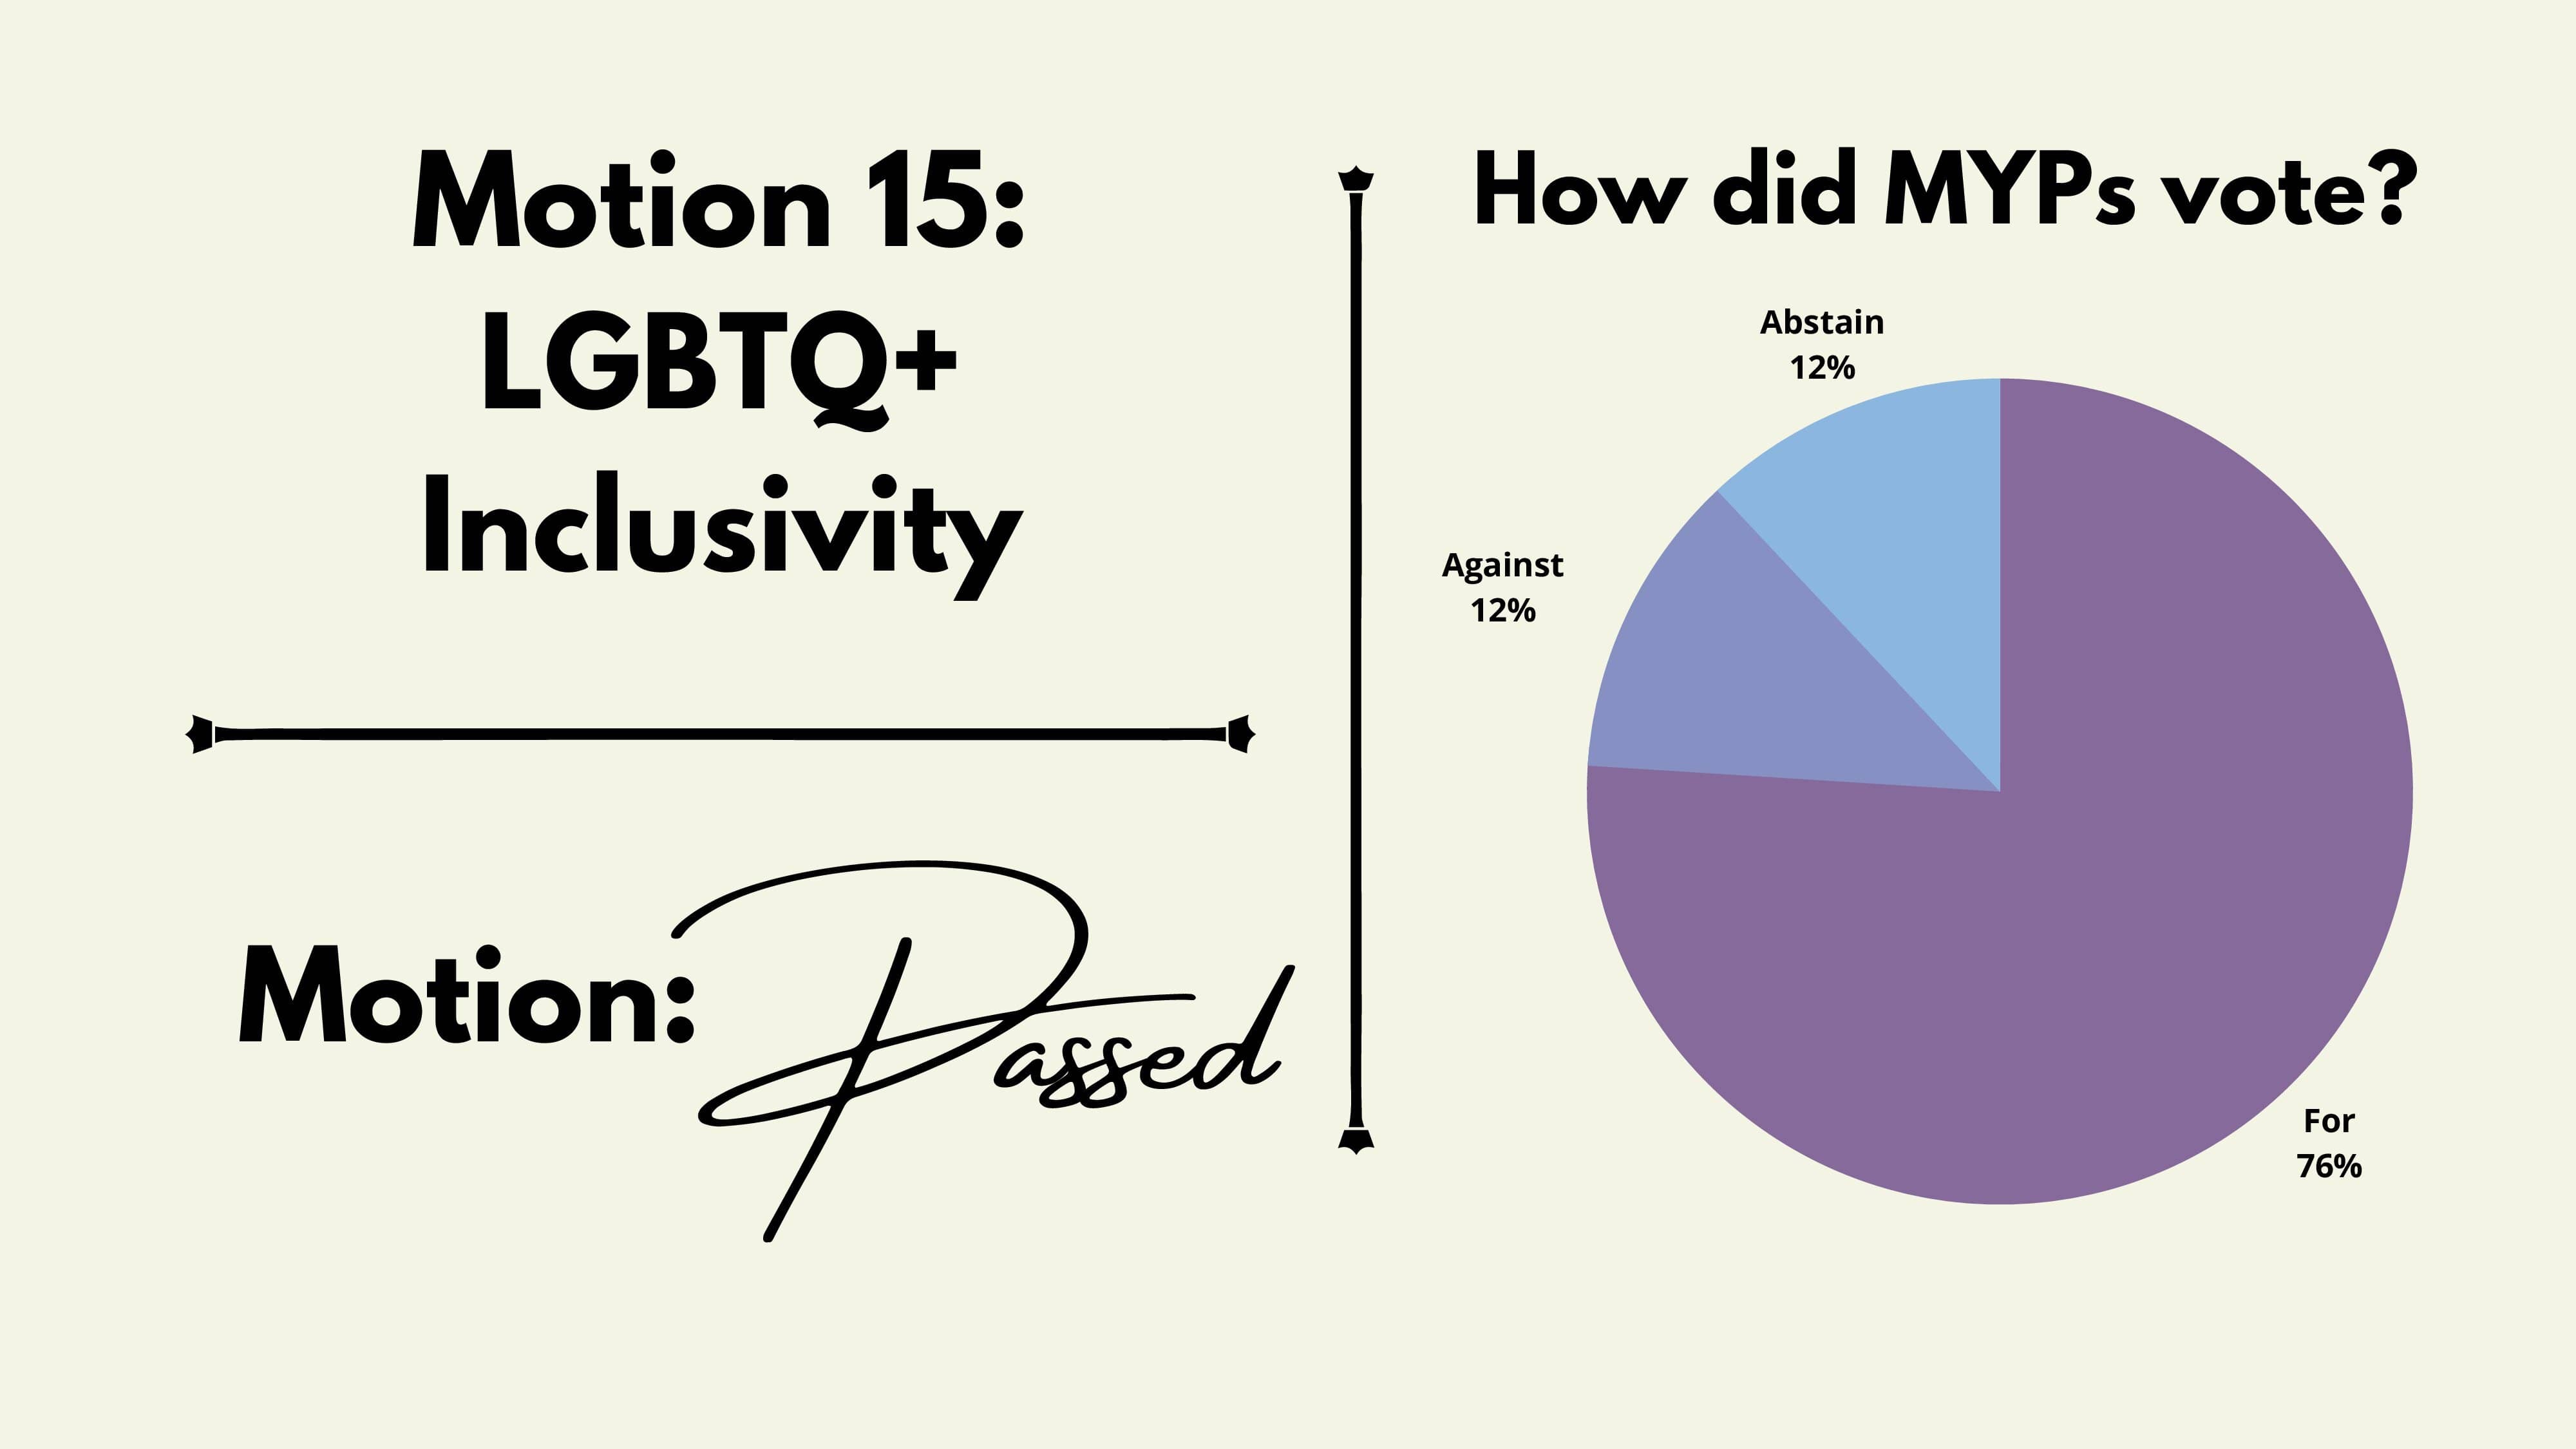 Text that says ‘Motion 15: LGBTQ+ Incluisivty’, below that ‘Motion: Passed’. On the right, it has a pie chart that represents ‘How did MYPs vote?’, with the figures 76% for, 12% against and 12% abstain